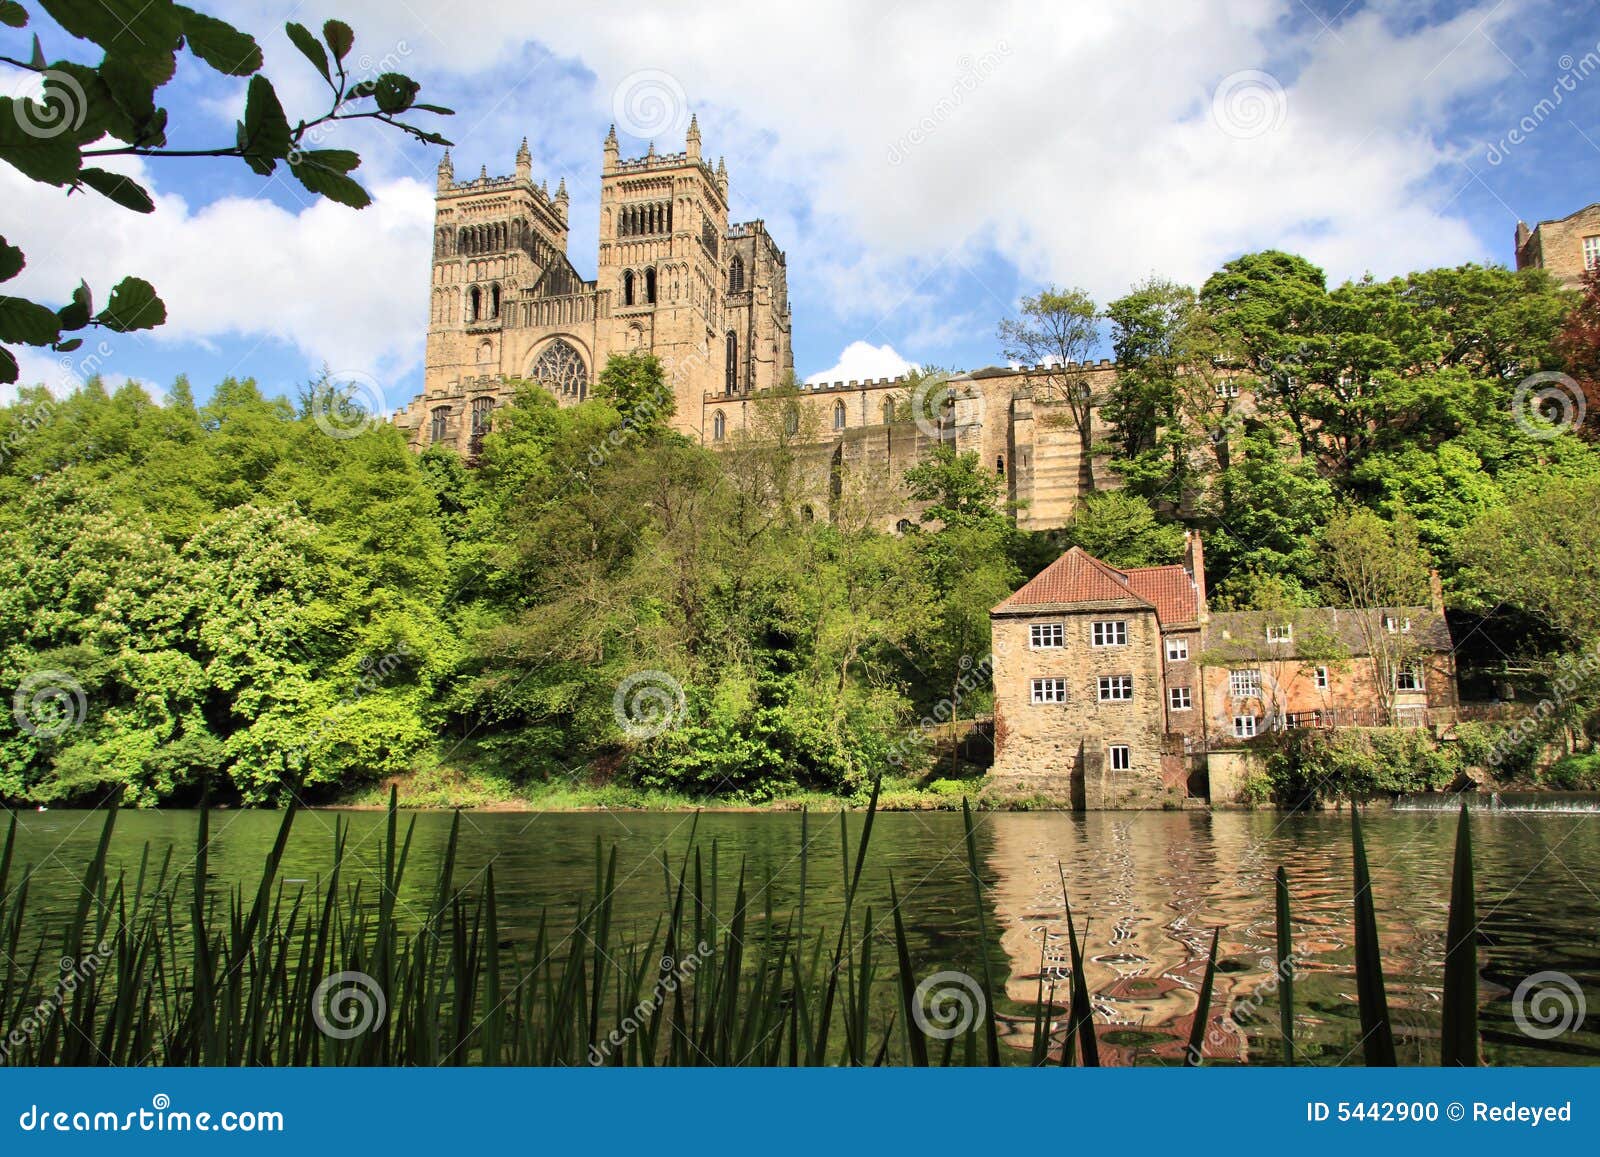 durham cathedral on the river